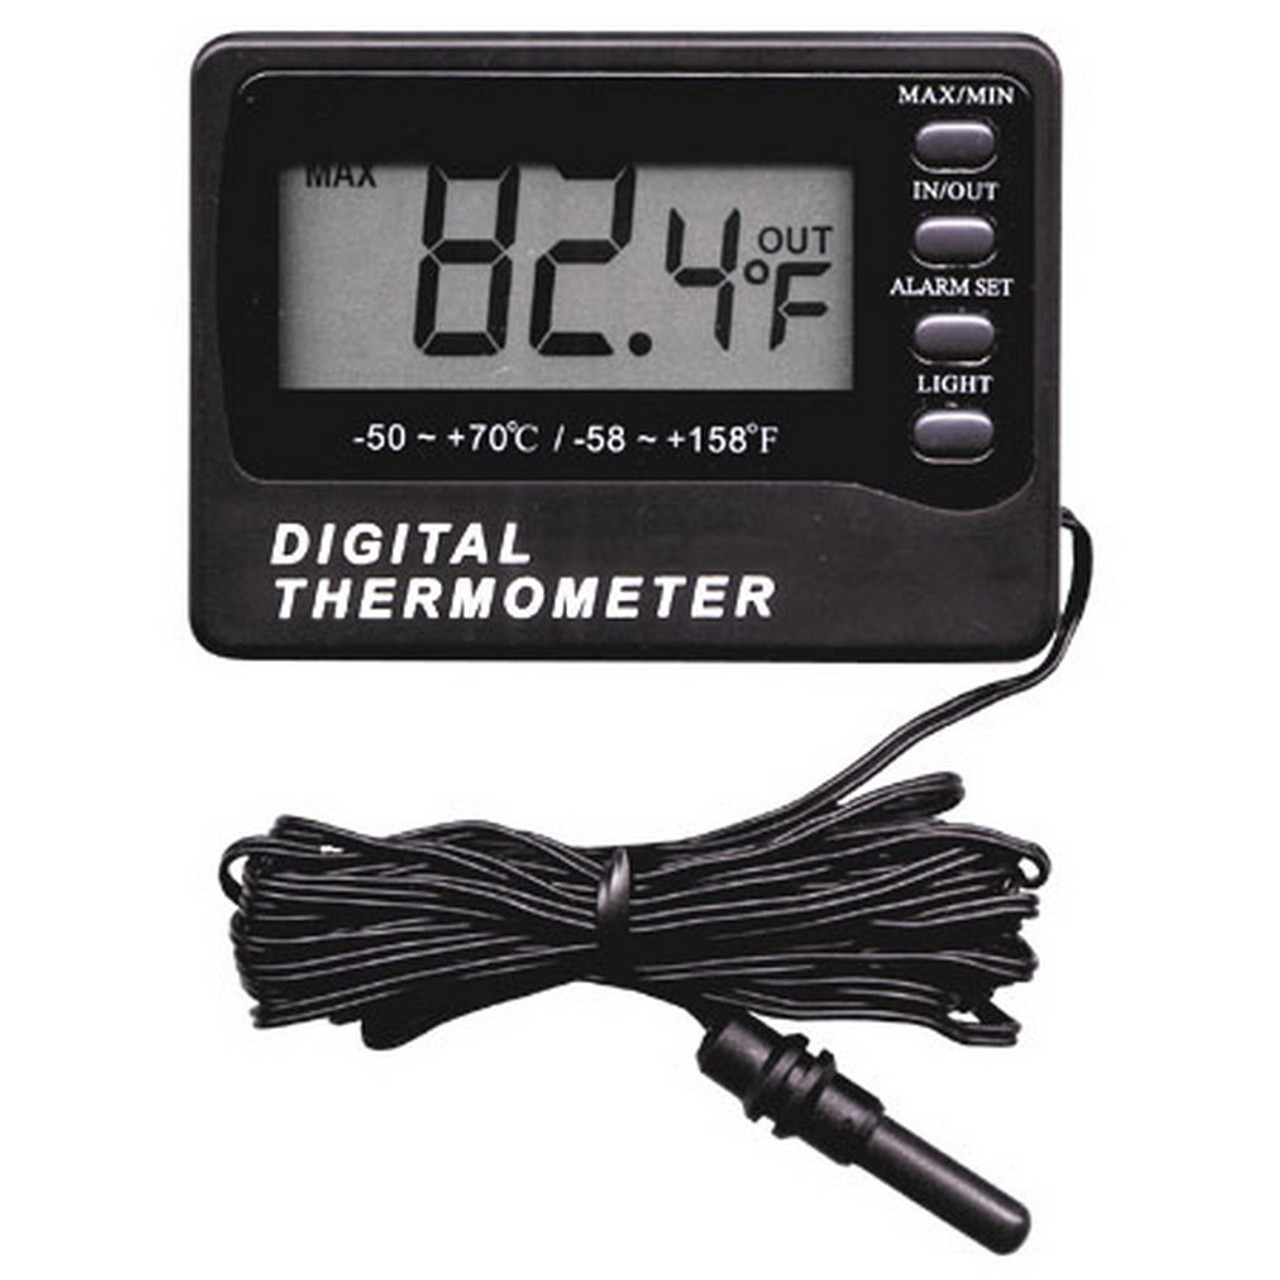 Min/Max Recording Thermometer w/ Alarms (RT8100MAT)